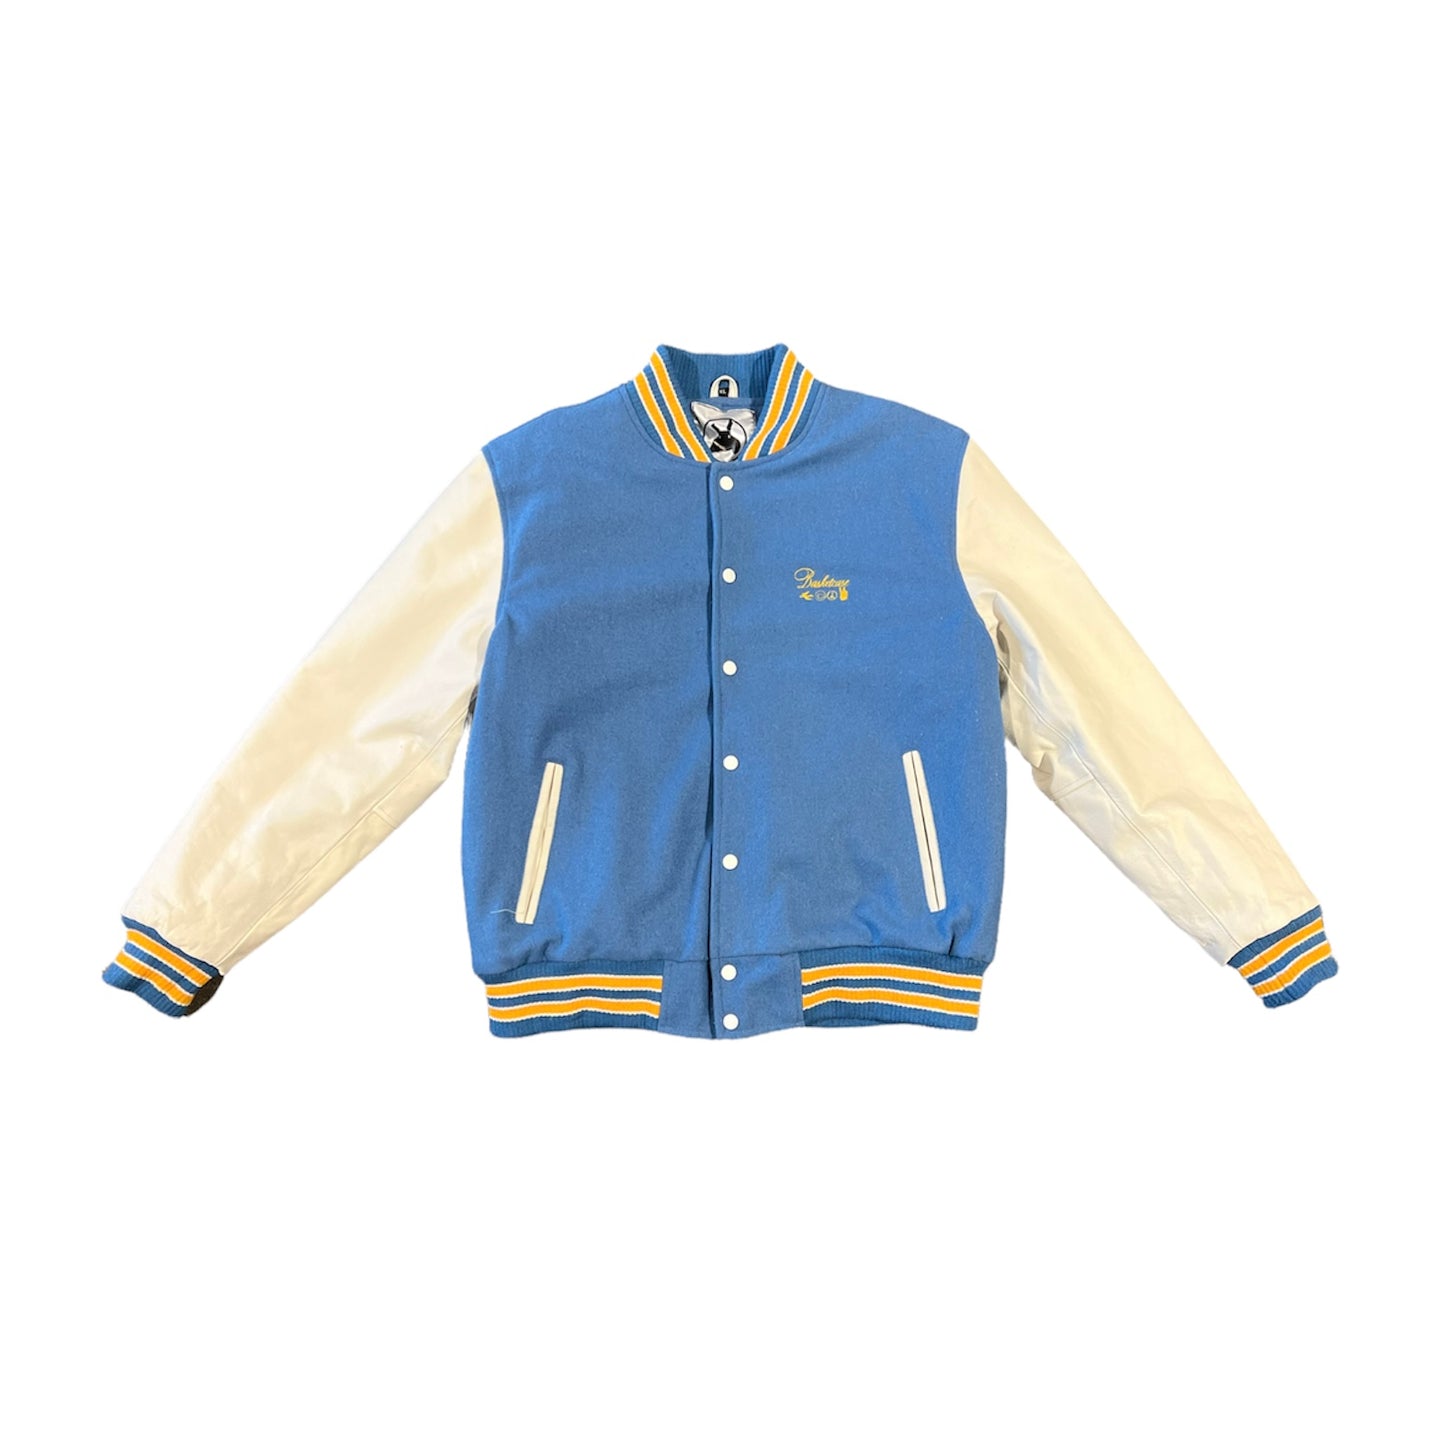 Basketcase Gallery Raw College Letterman (Size XL)